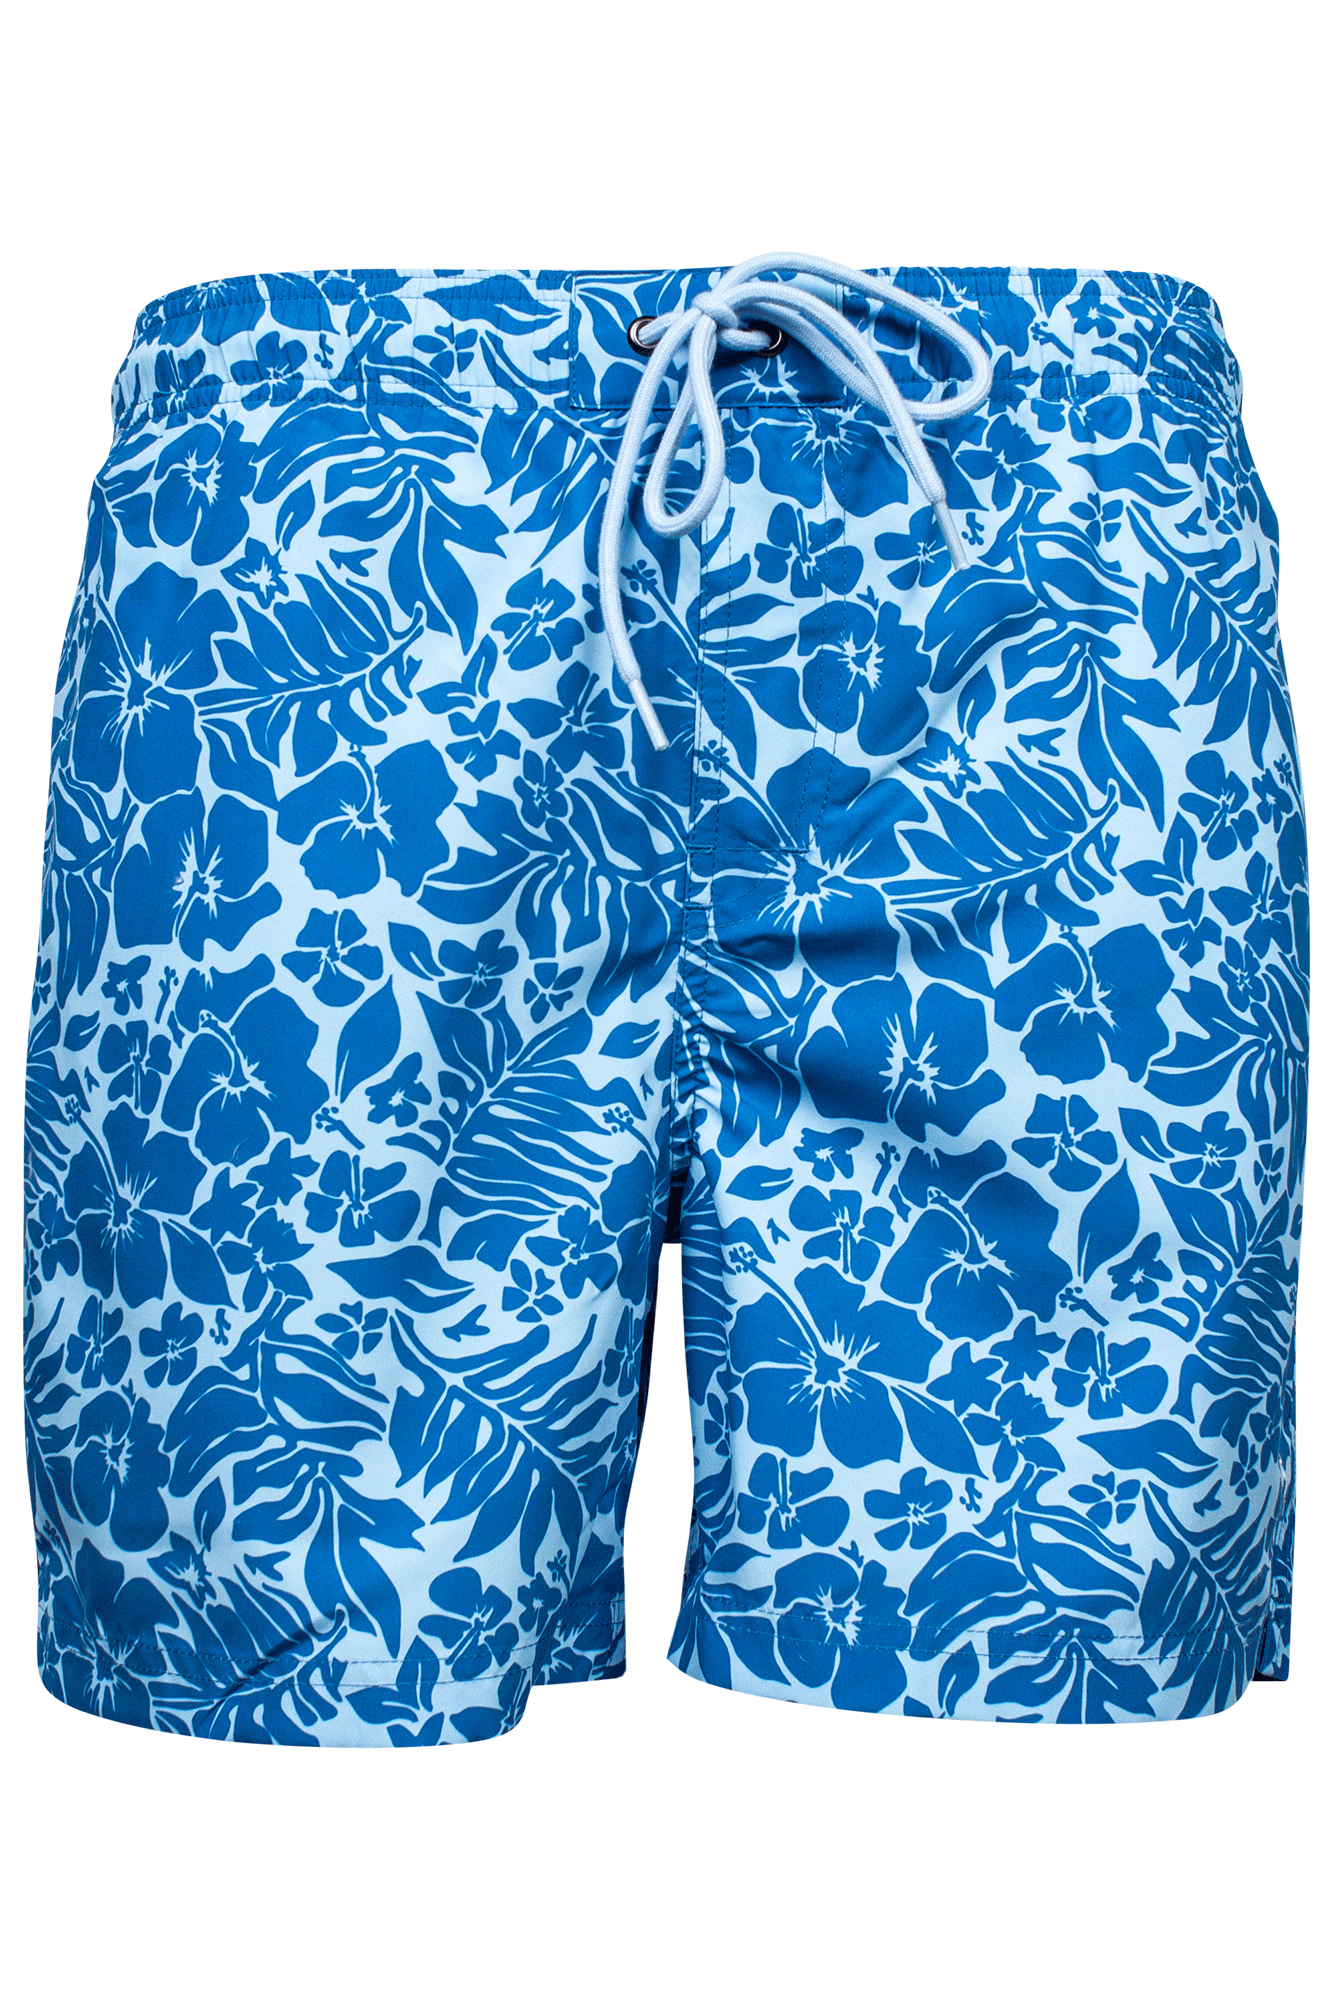 Cobalt tropical flowers by Giordano